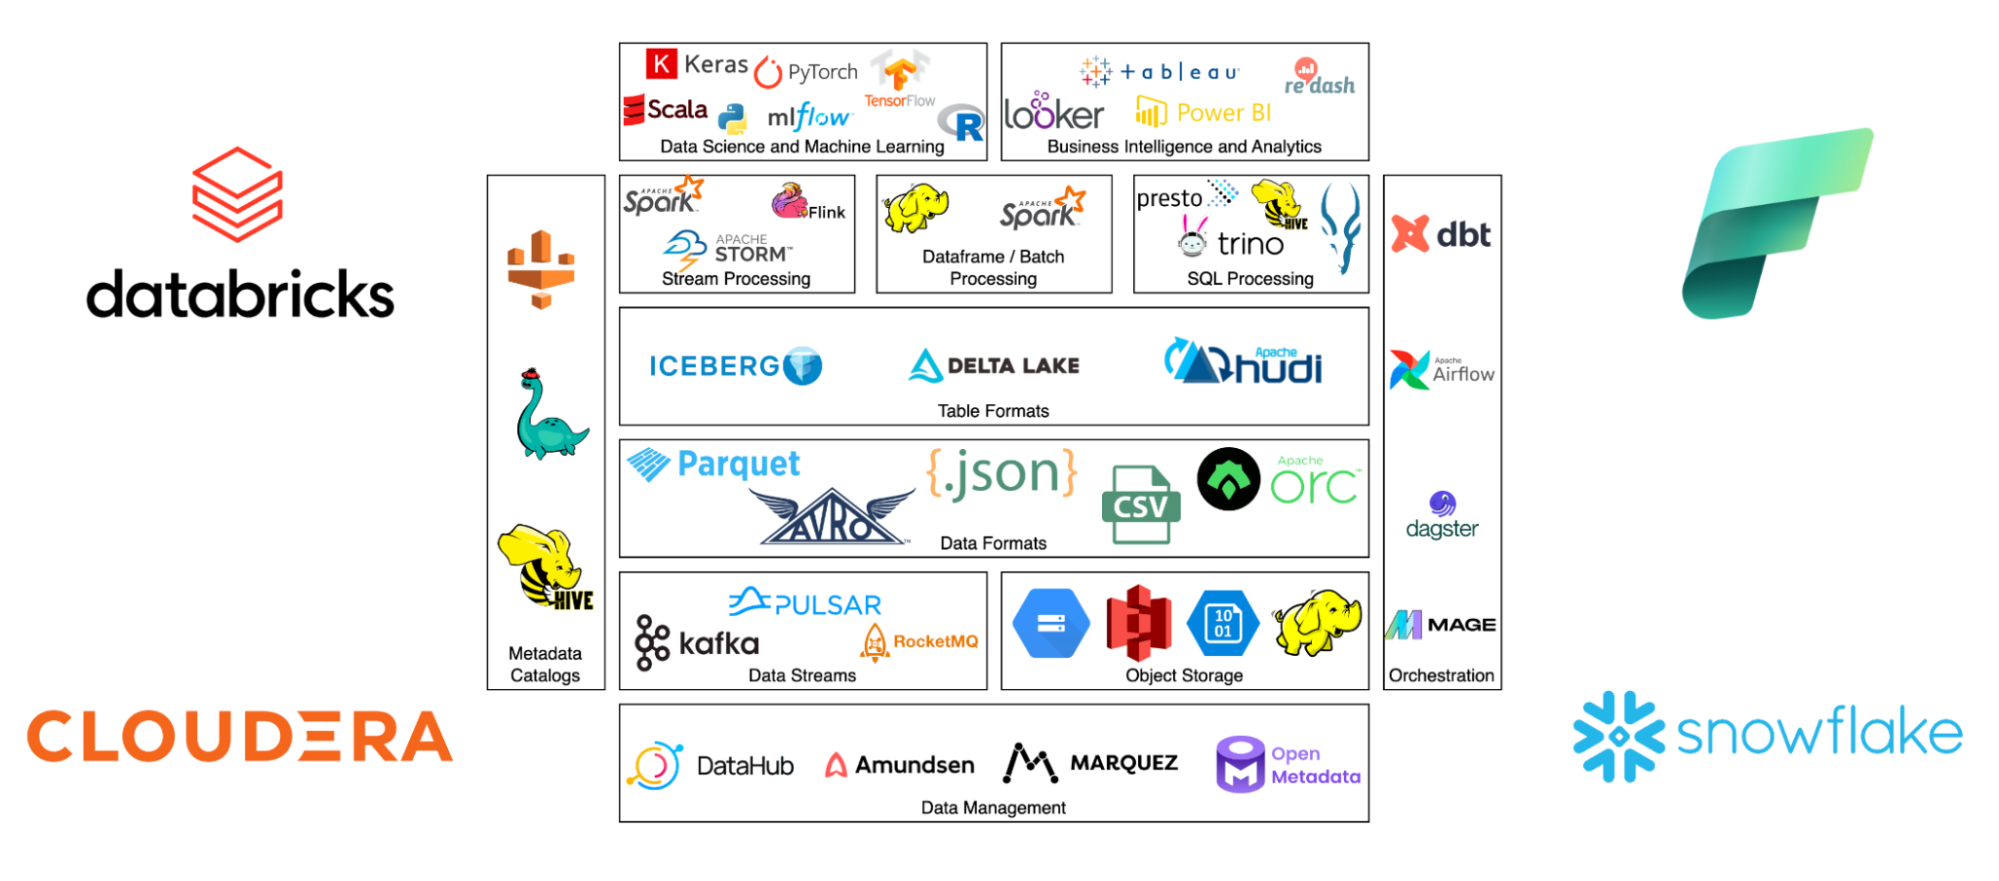 Infographic of data platform services and tools, including Databricks, Cloudera, and Snowflake logos, categories such as Data Science and Machine Learning with Keras, PyTorch, and TensorFlow, Business Intelligence and Analytics with Tableau and Power BI, SQL Processing with Presto and Hive, among others.